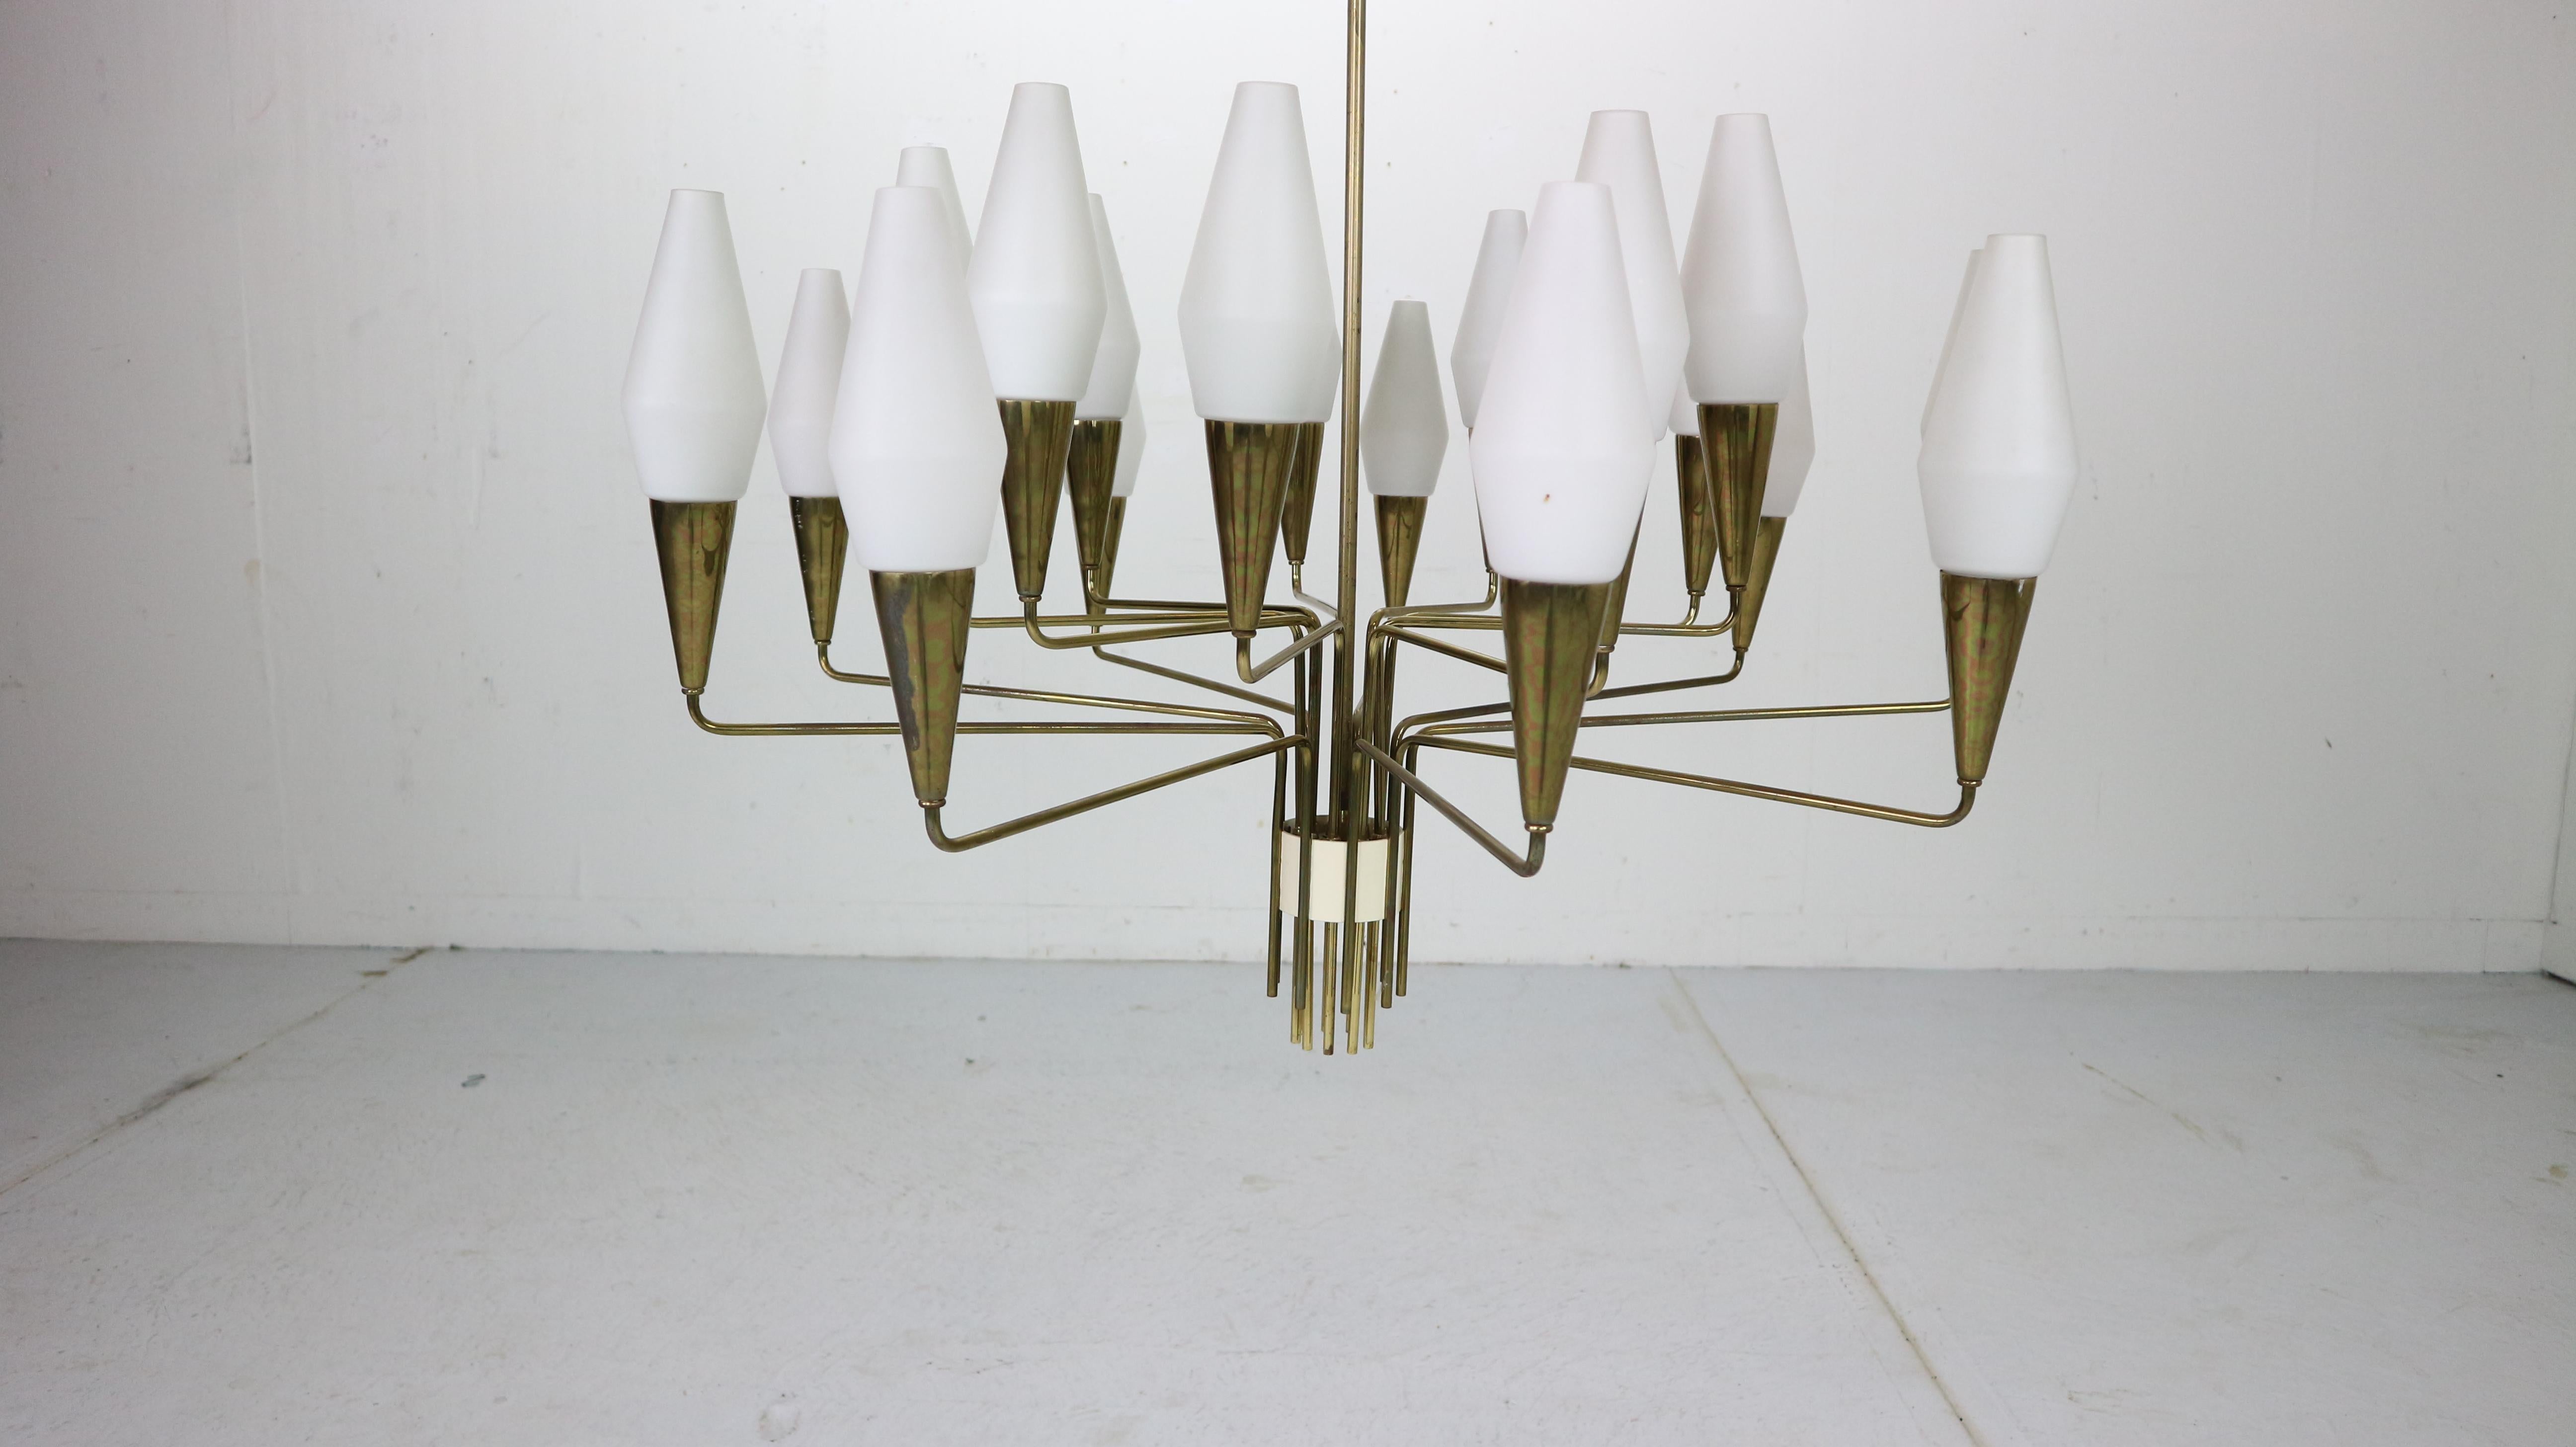 Mid-Century Modern period very elegant 18-armed large chandelier made in Italy, 1960s period.
The entire frame is made of brass. 18 opaline glass shades gives a lot of light.
Very good condition and fully functional lamp in original